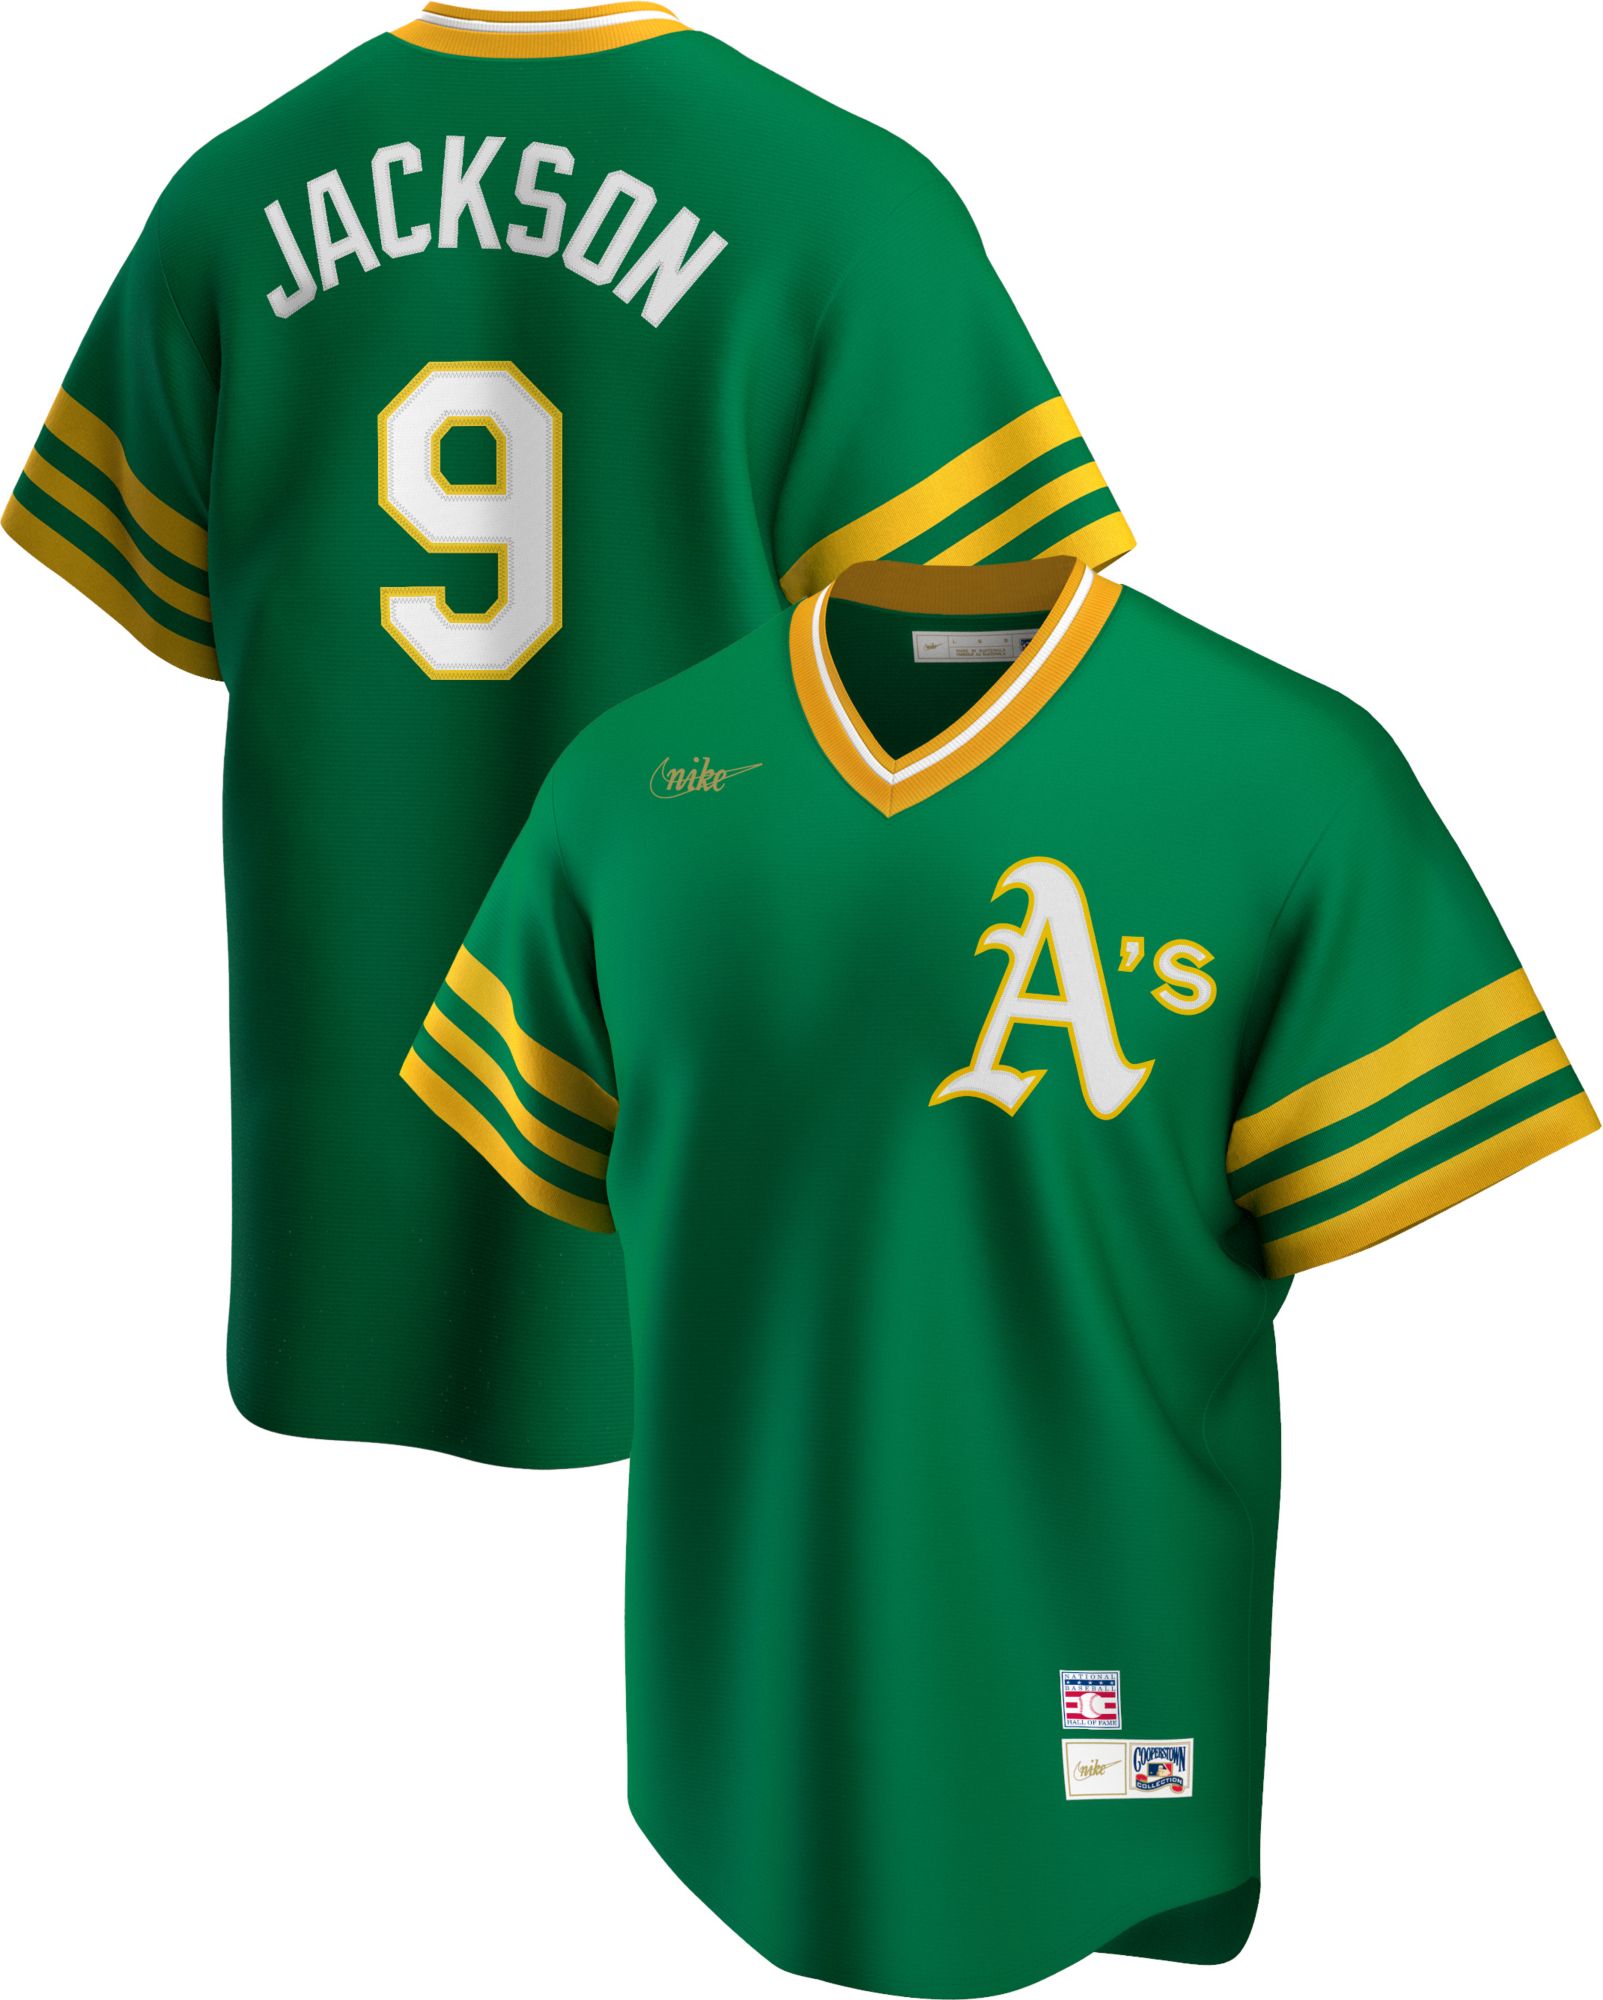 A's jersey number